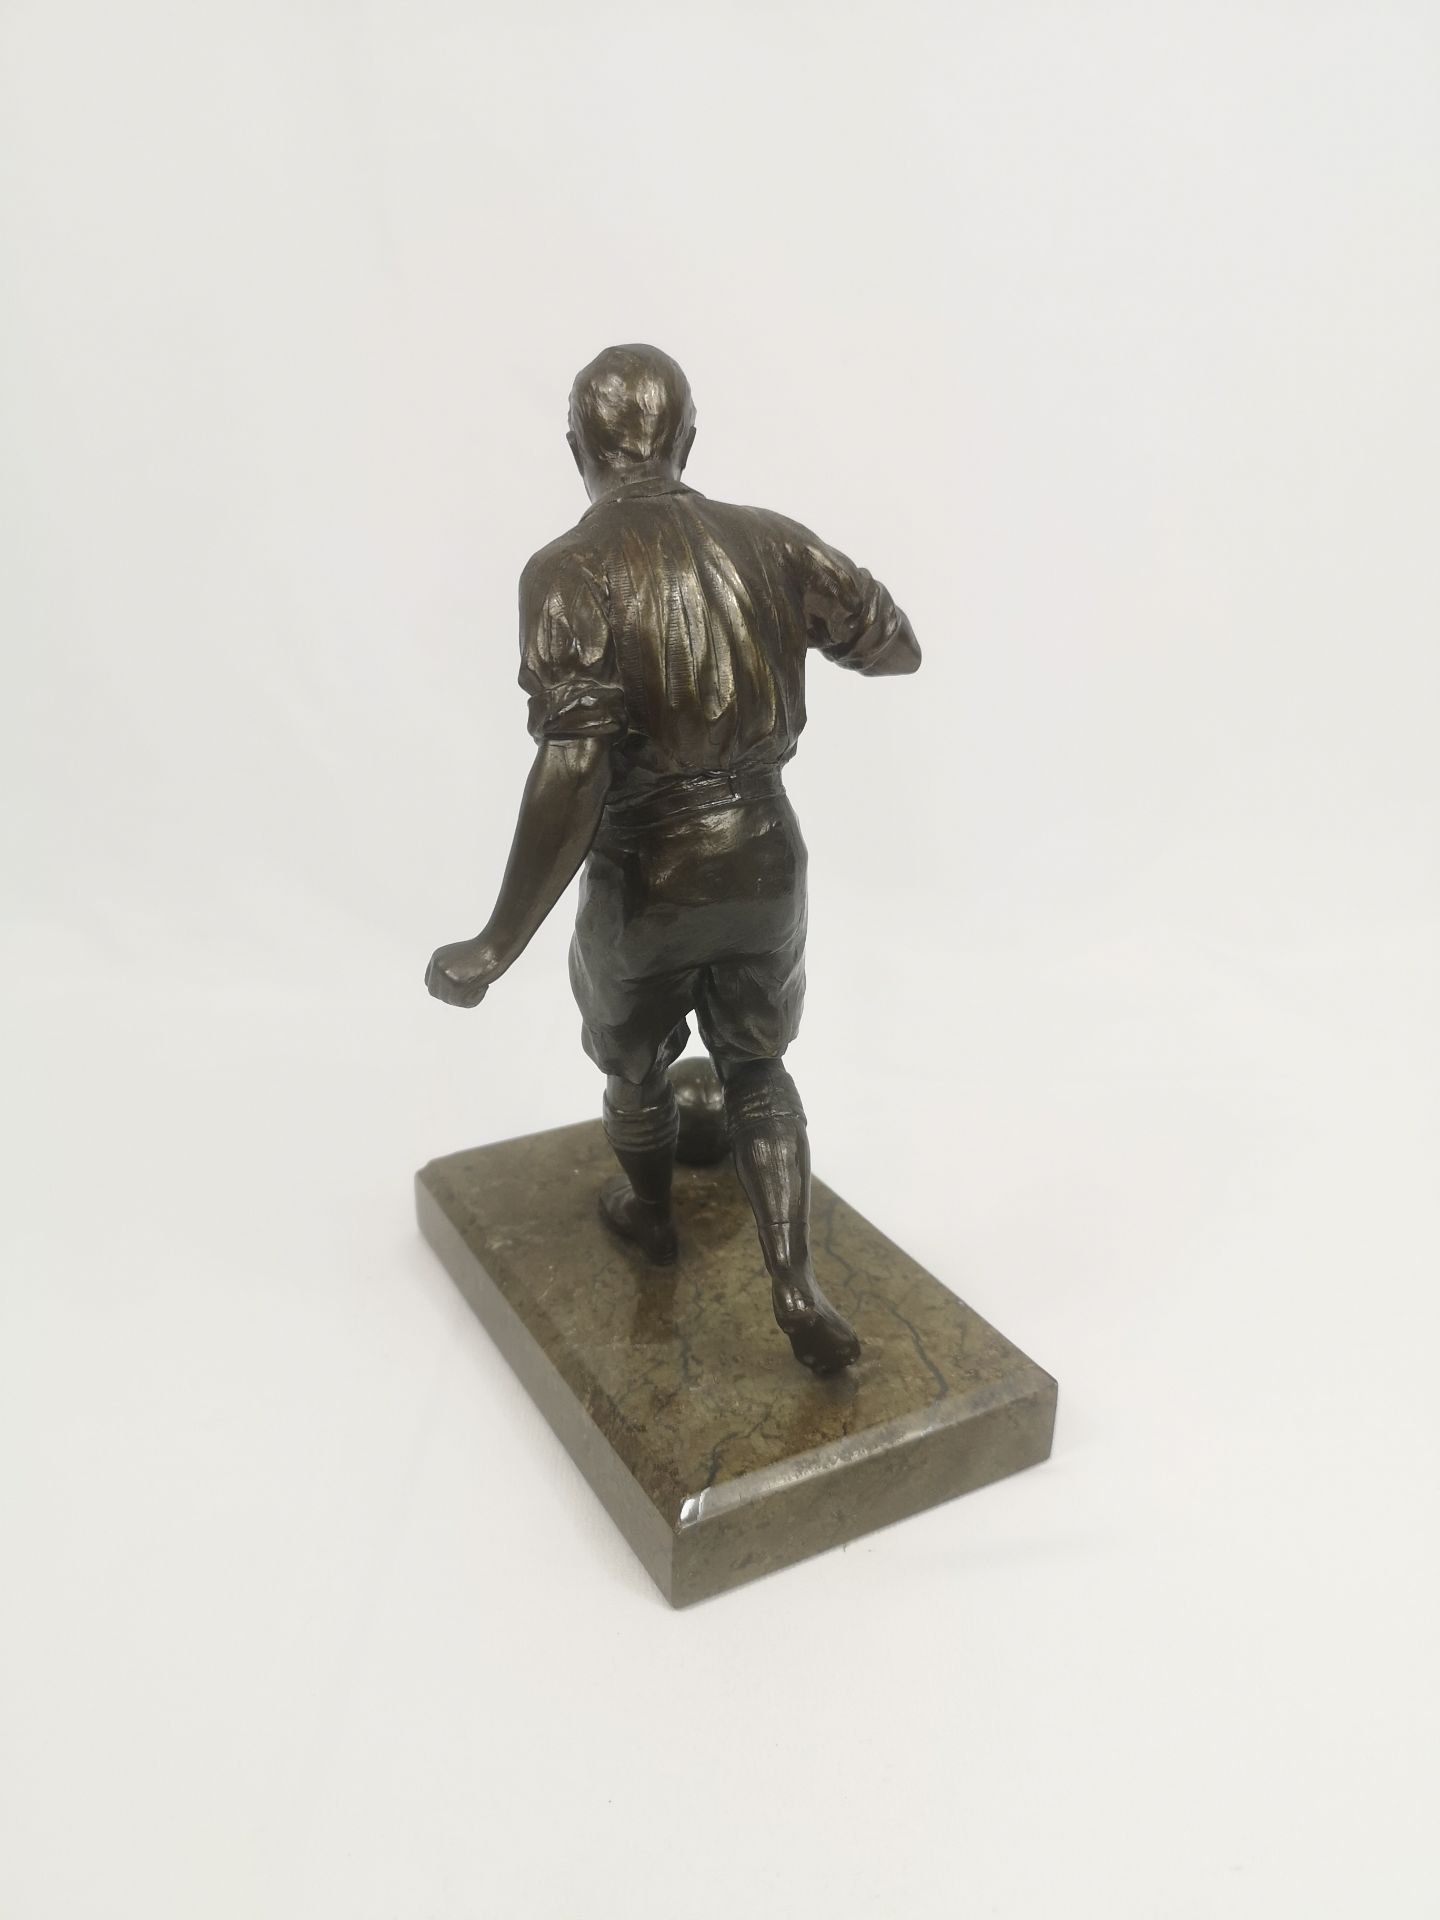 Bronzed figurine of a footballer - Image 3 of 5